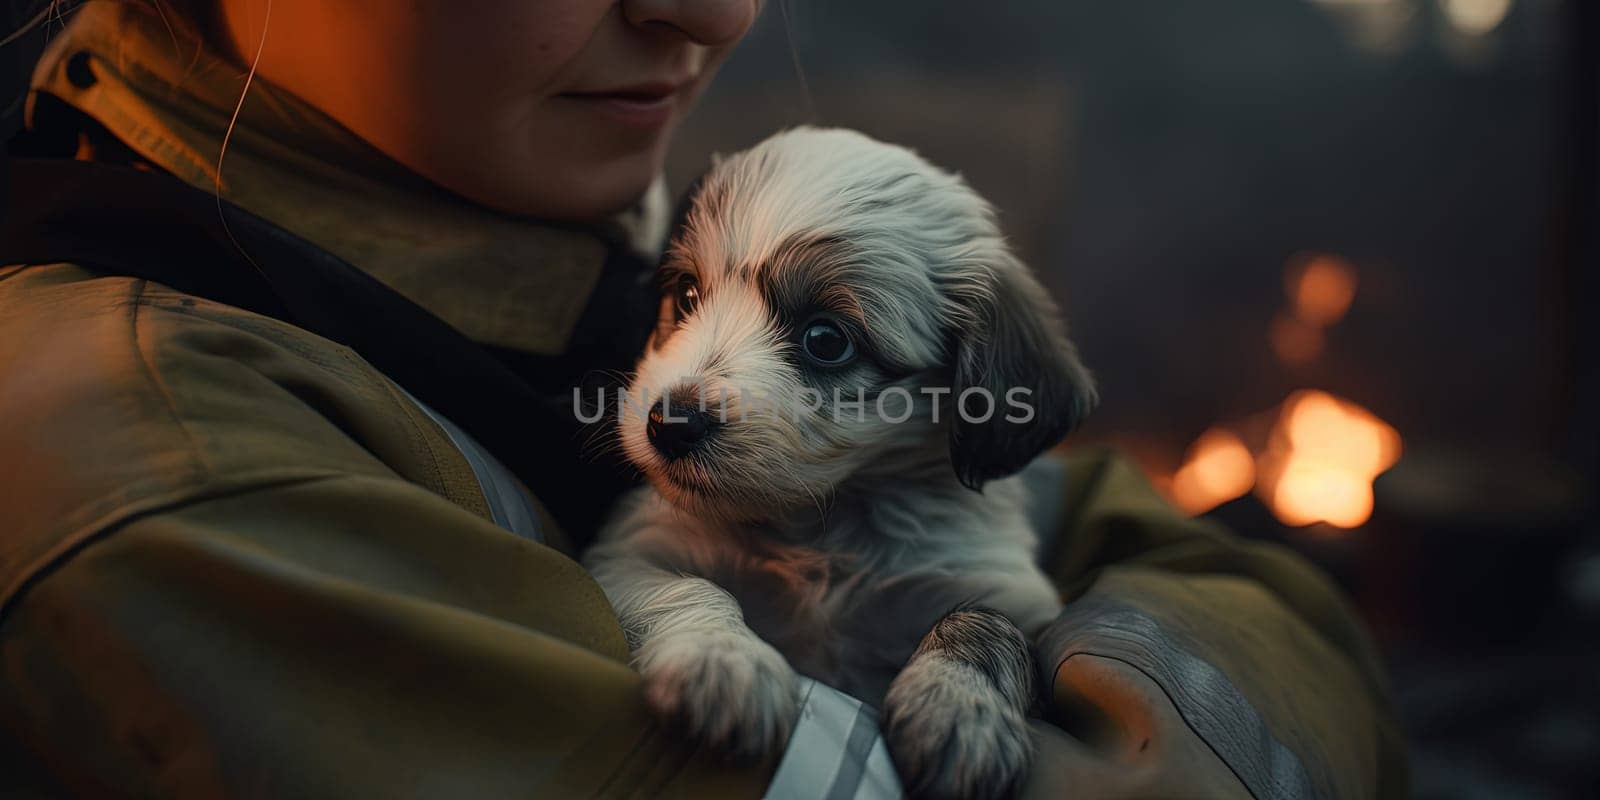 Fireman Holding Wild Puppy Dog During Fire by tan4ikk1